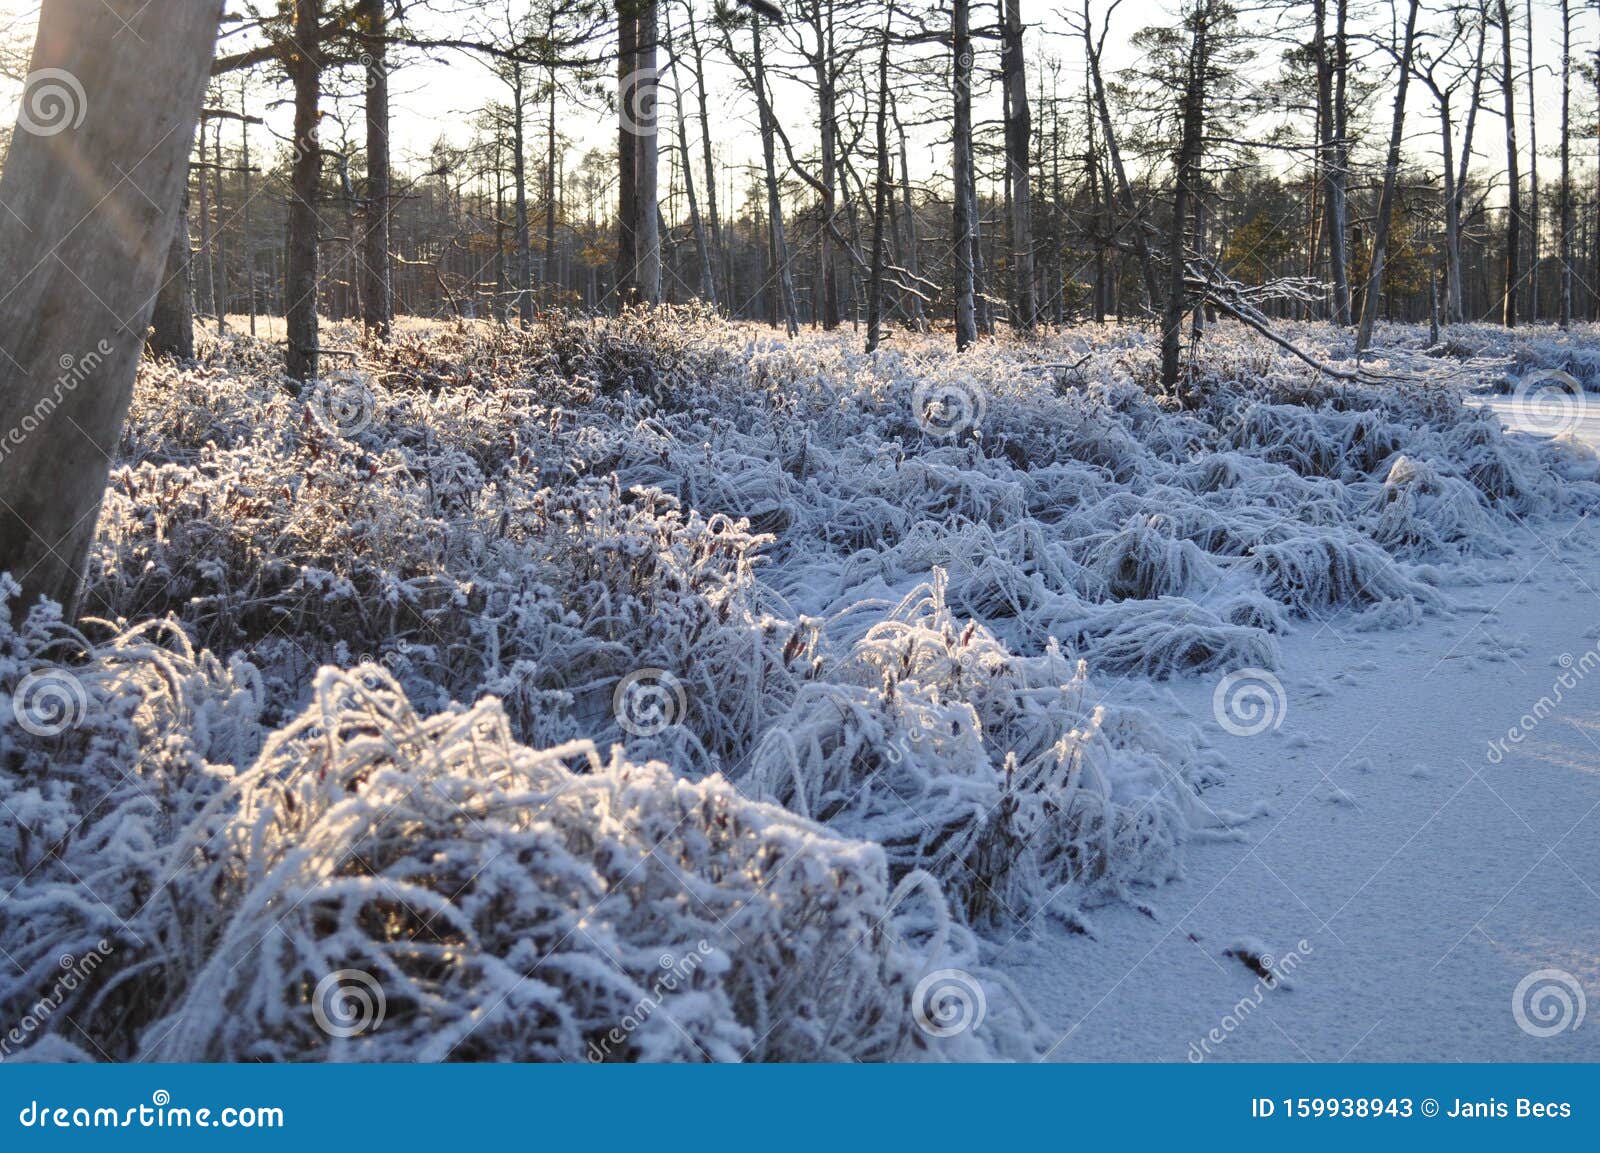 snowy bog grown by pine trees and moorland vegetation covered by shiny frost and surrounded by frozen ponds on sunny winter day